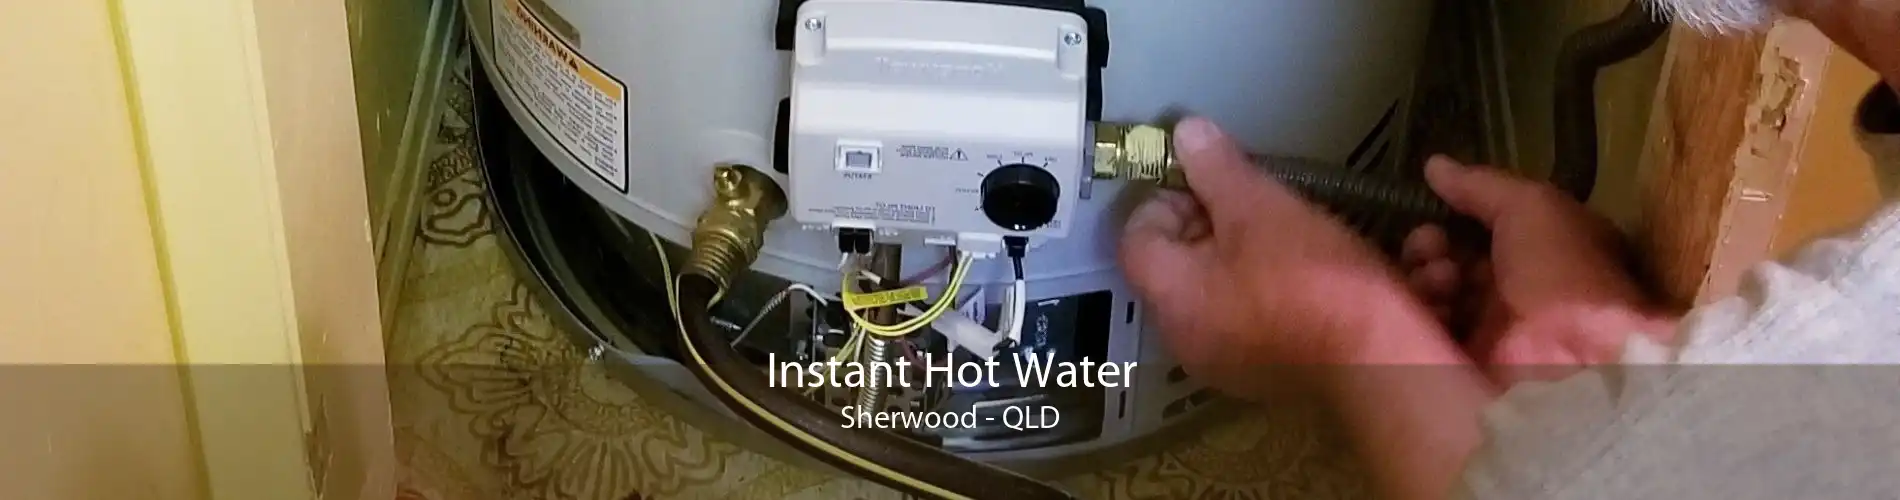 Instant Hot Water Sherwood - QLD